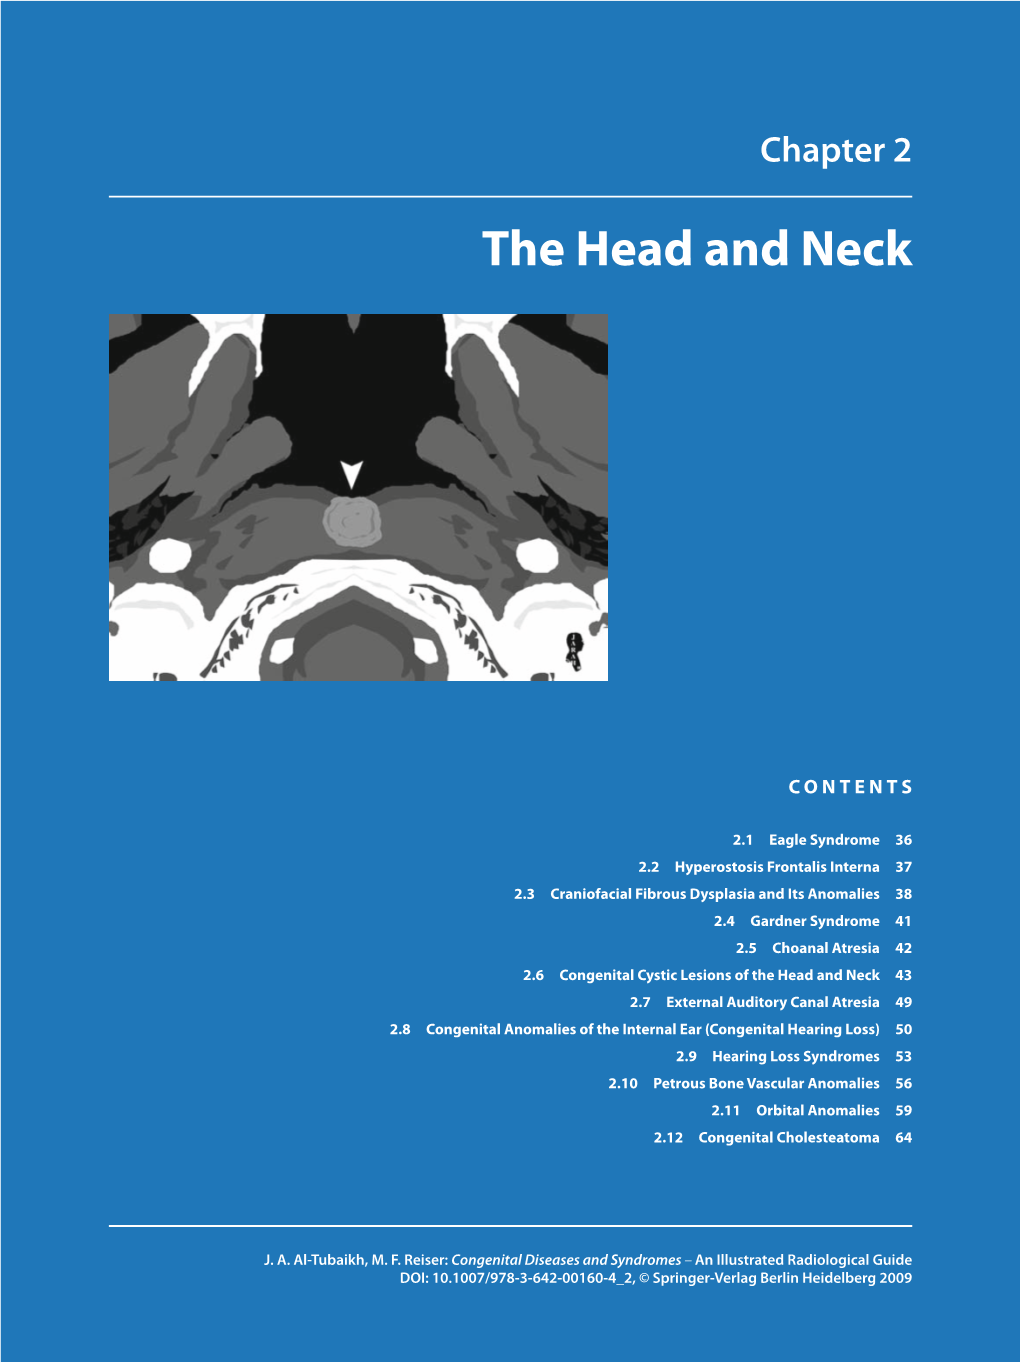 The Head and Neck